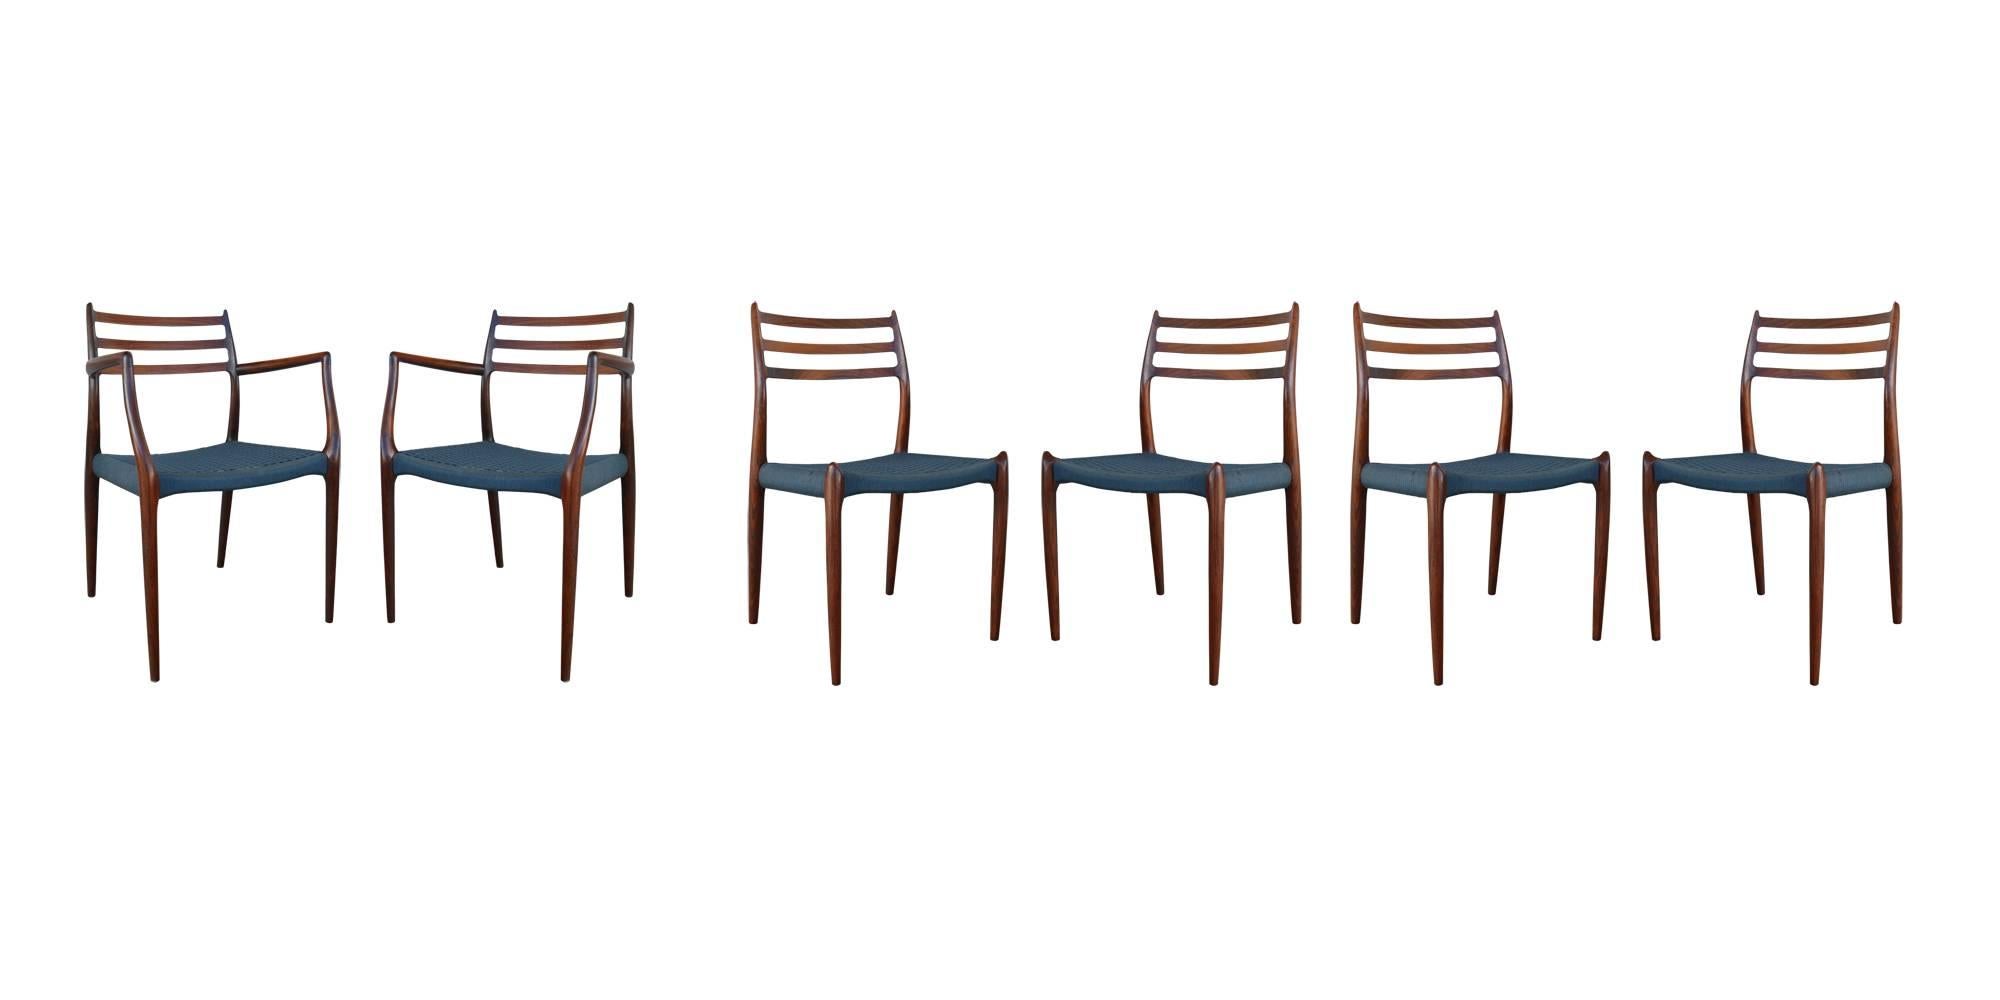 20th Century Niels Otto Moller Rosewood Dining Chairs #62 and #78 with Original Cord Seats